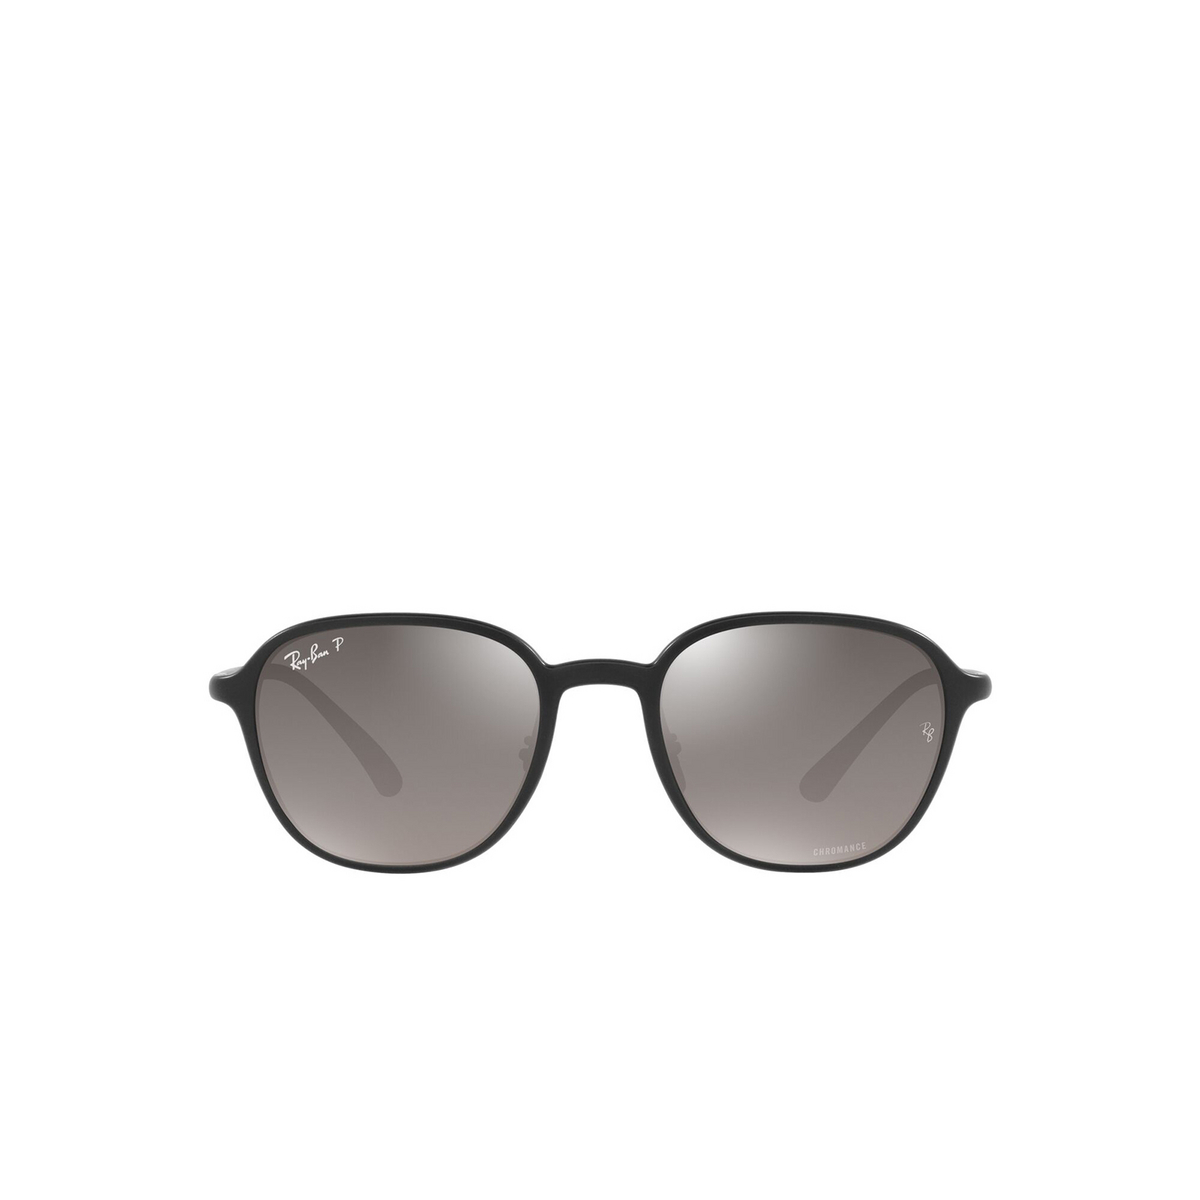 Ray-Ban® Square Sunglasses: RB4341CH color Sanding Black 601S5J - front view.